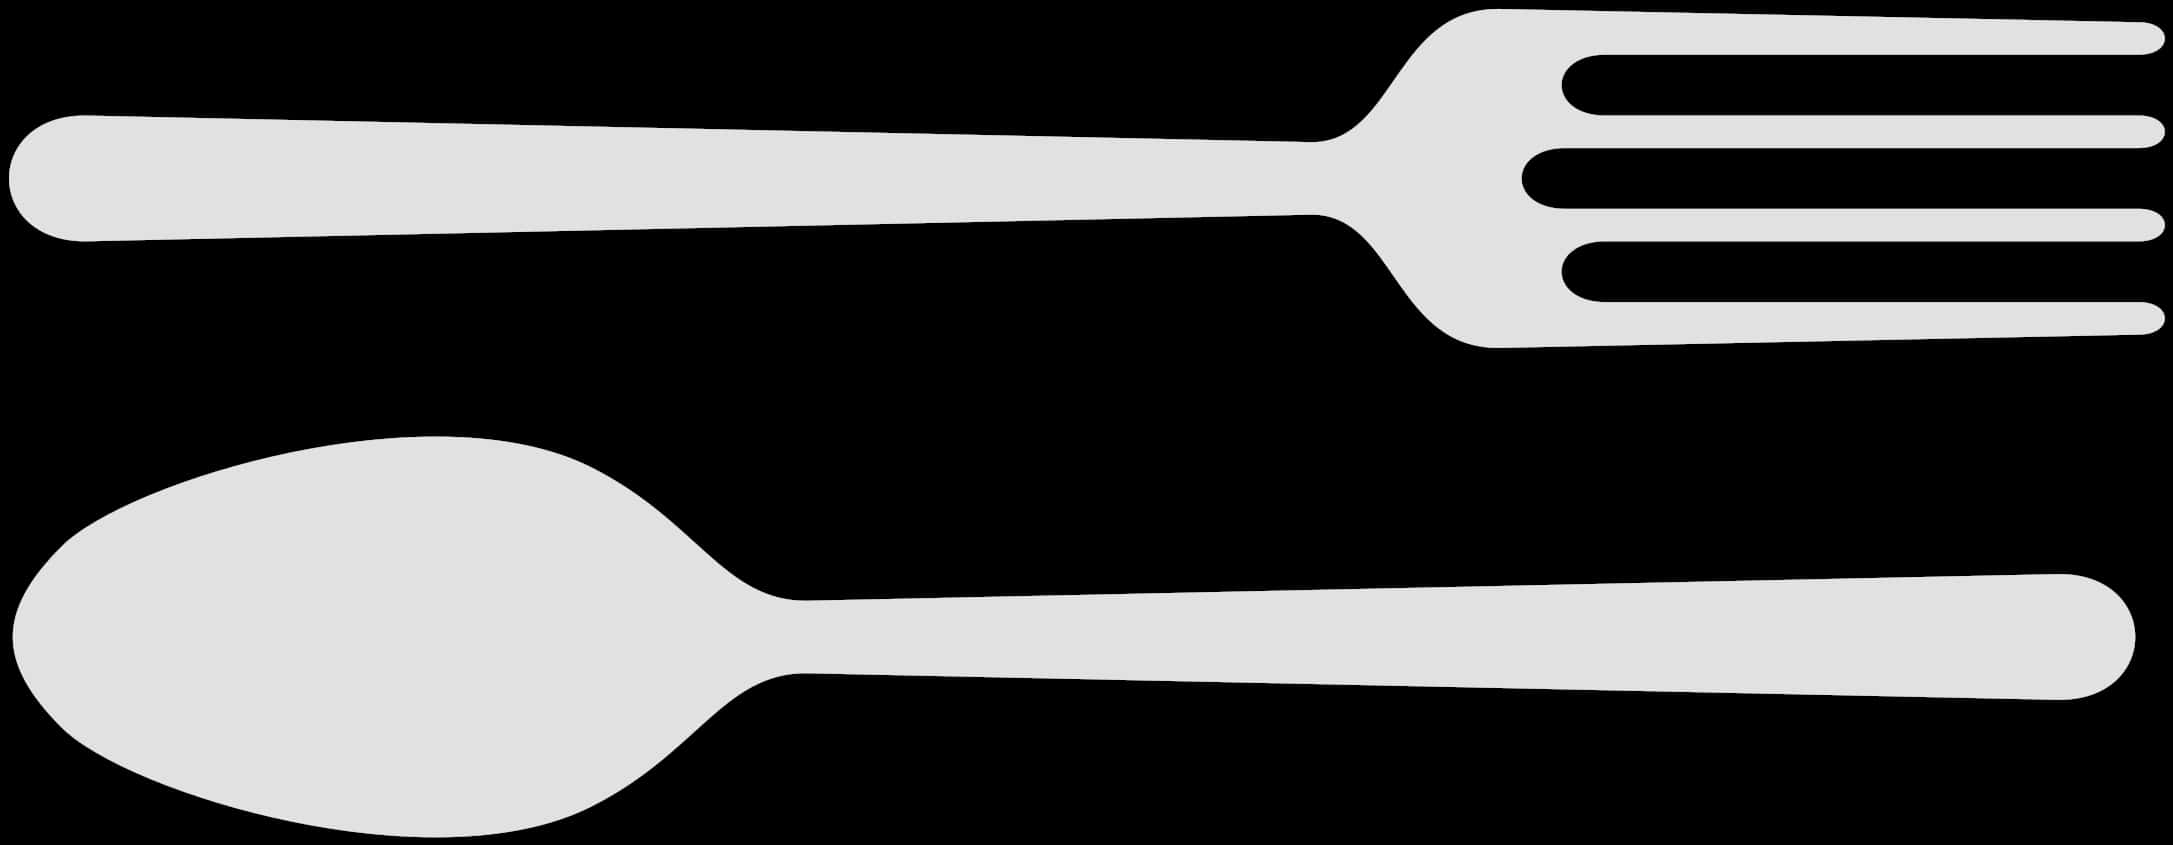 A Pair Of White Spoons